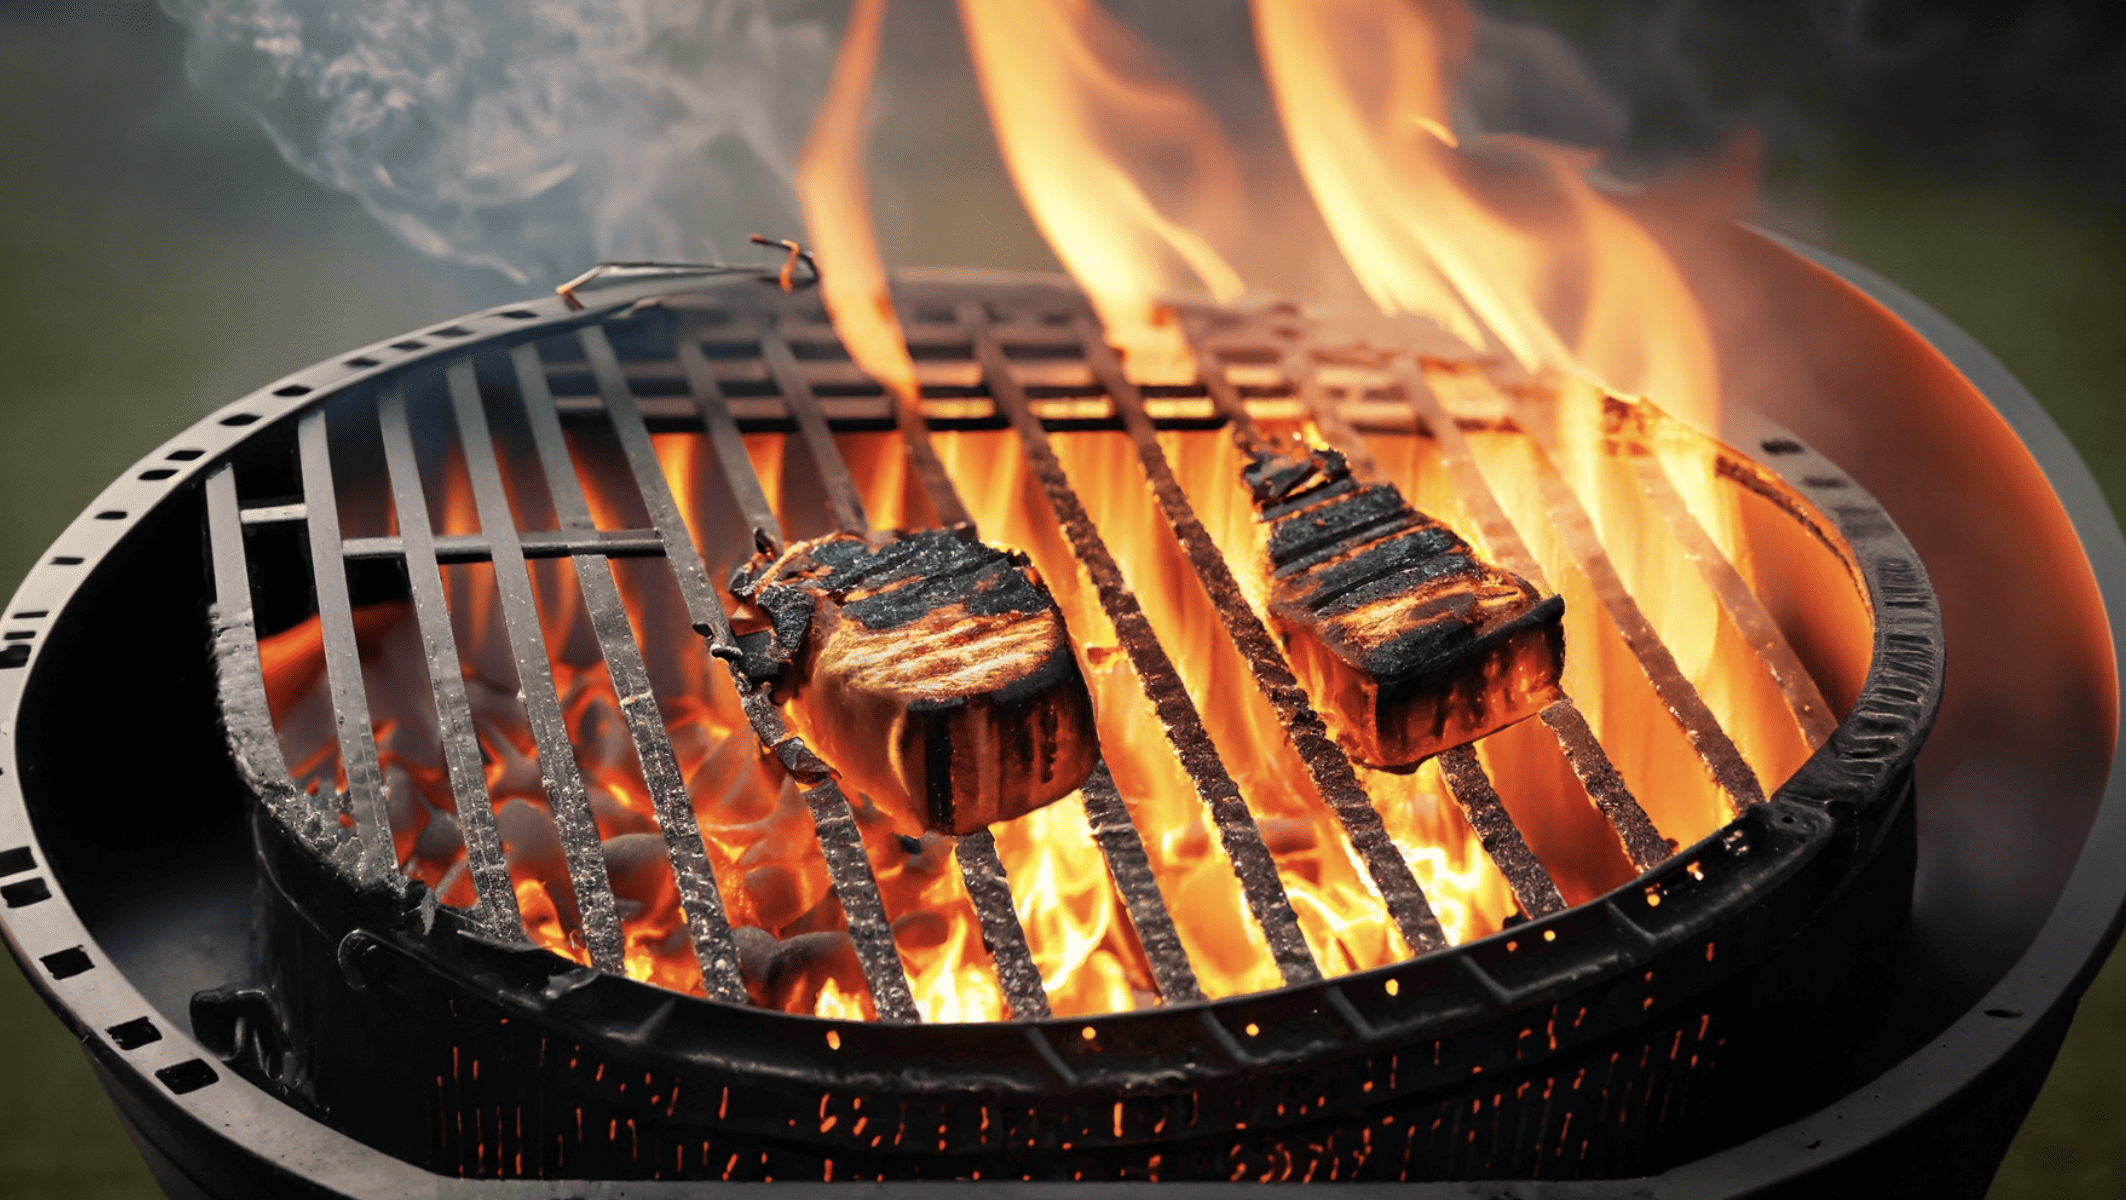 Grill on fire